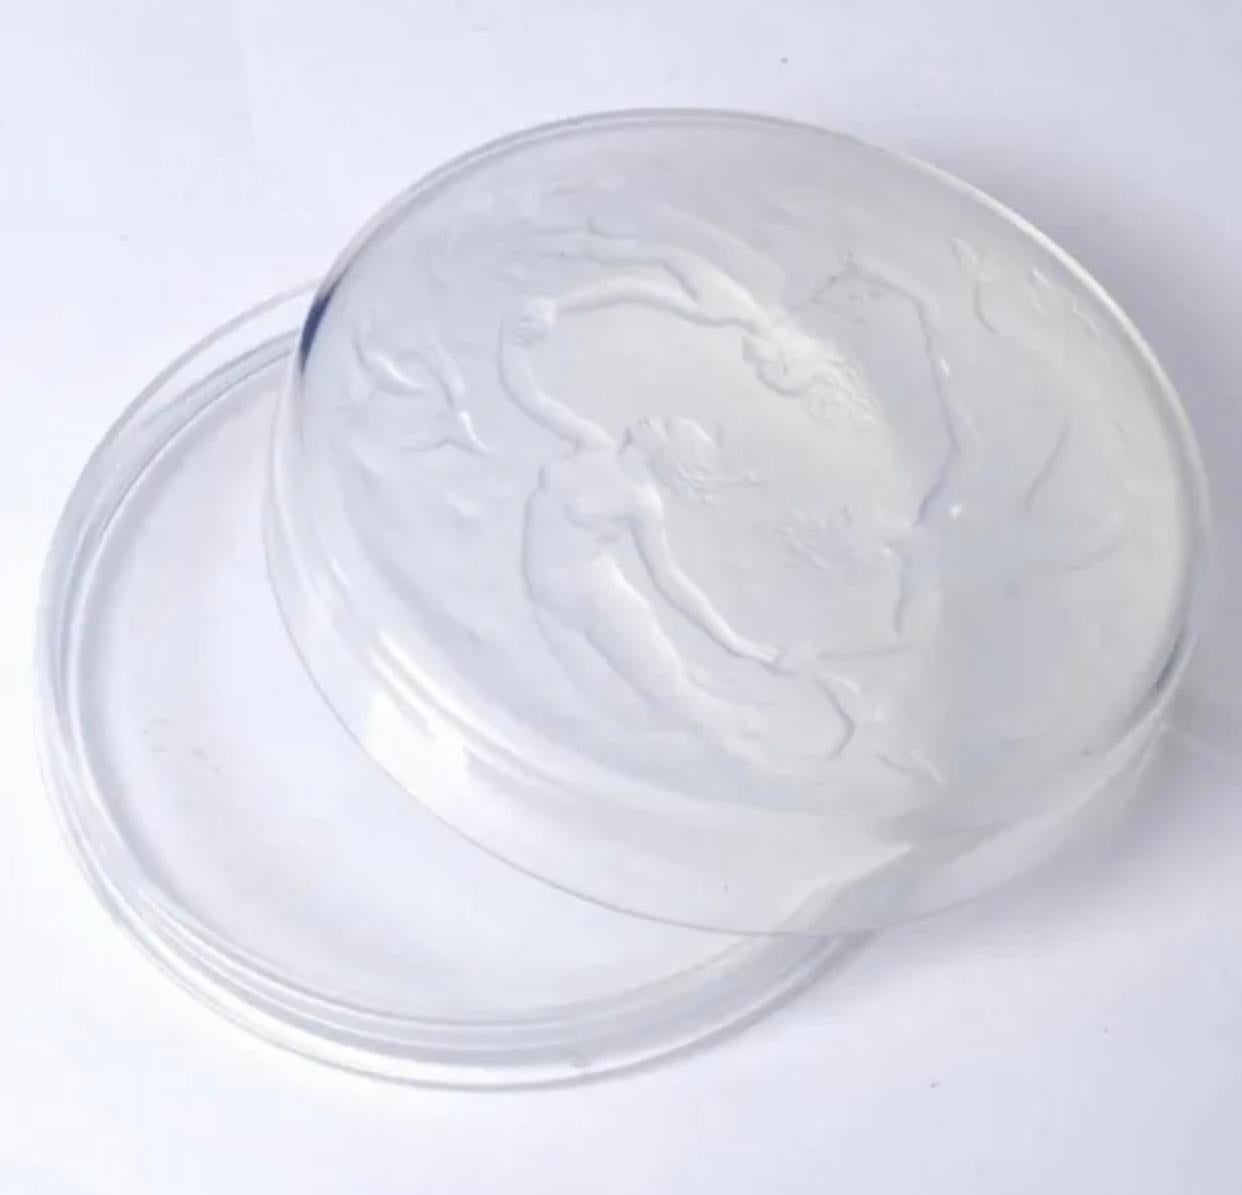 Antique Sabino Opalescent Glass Mermaid Candy Dish C. 1930 10” Diameter.

Sabino opalescent glass Mermaid candy box . 1930 Slightly domed cover depicts 3 mermaids. Marked “Sabino France”. 2” x 10”.

Great condition, some bubbles from manufacturing